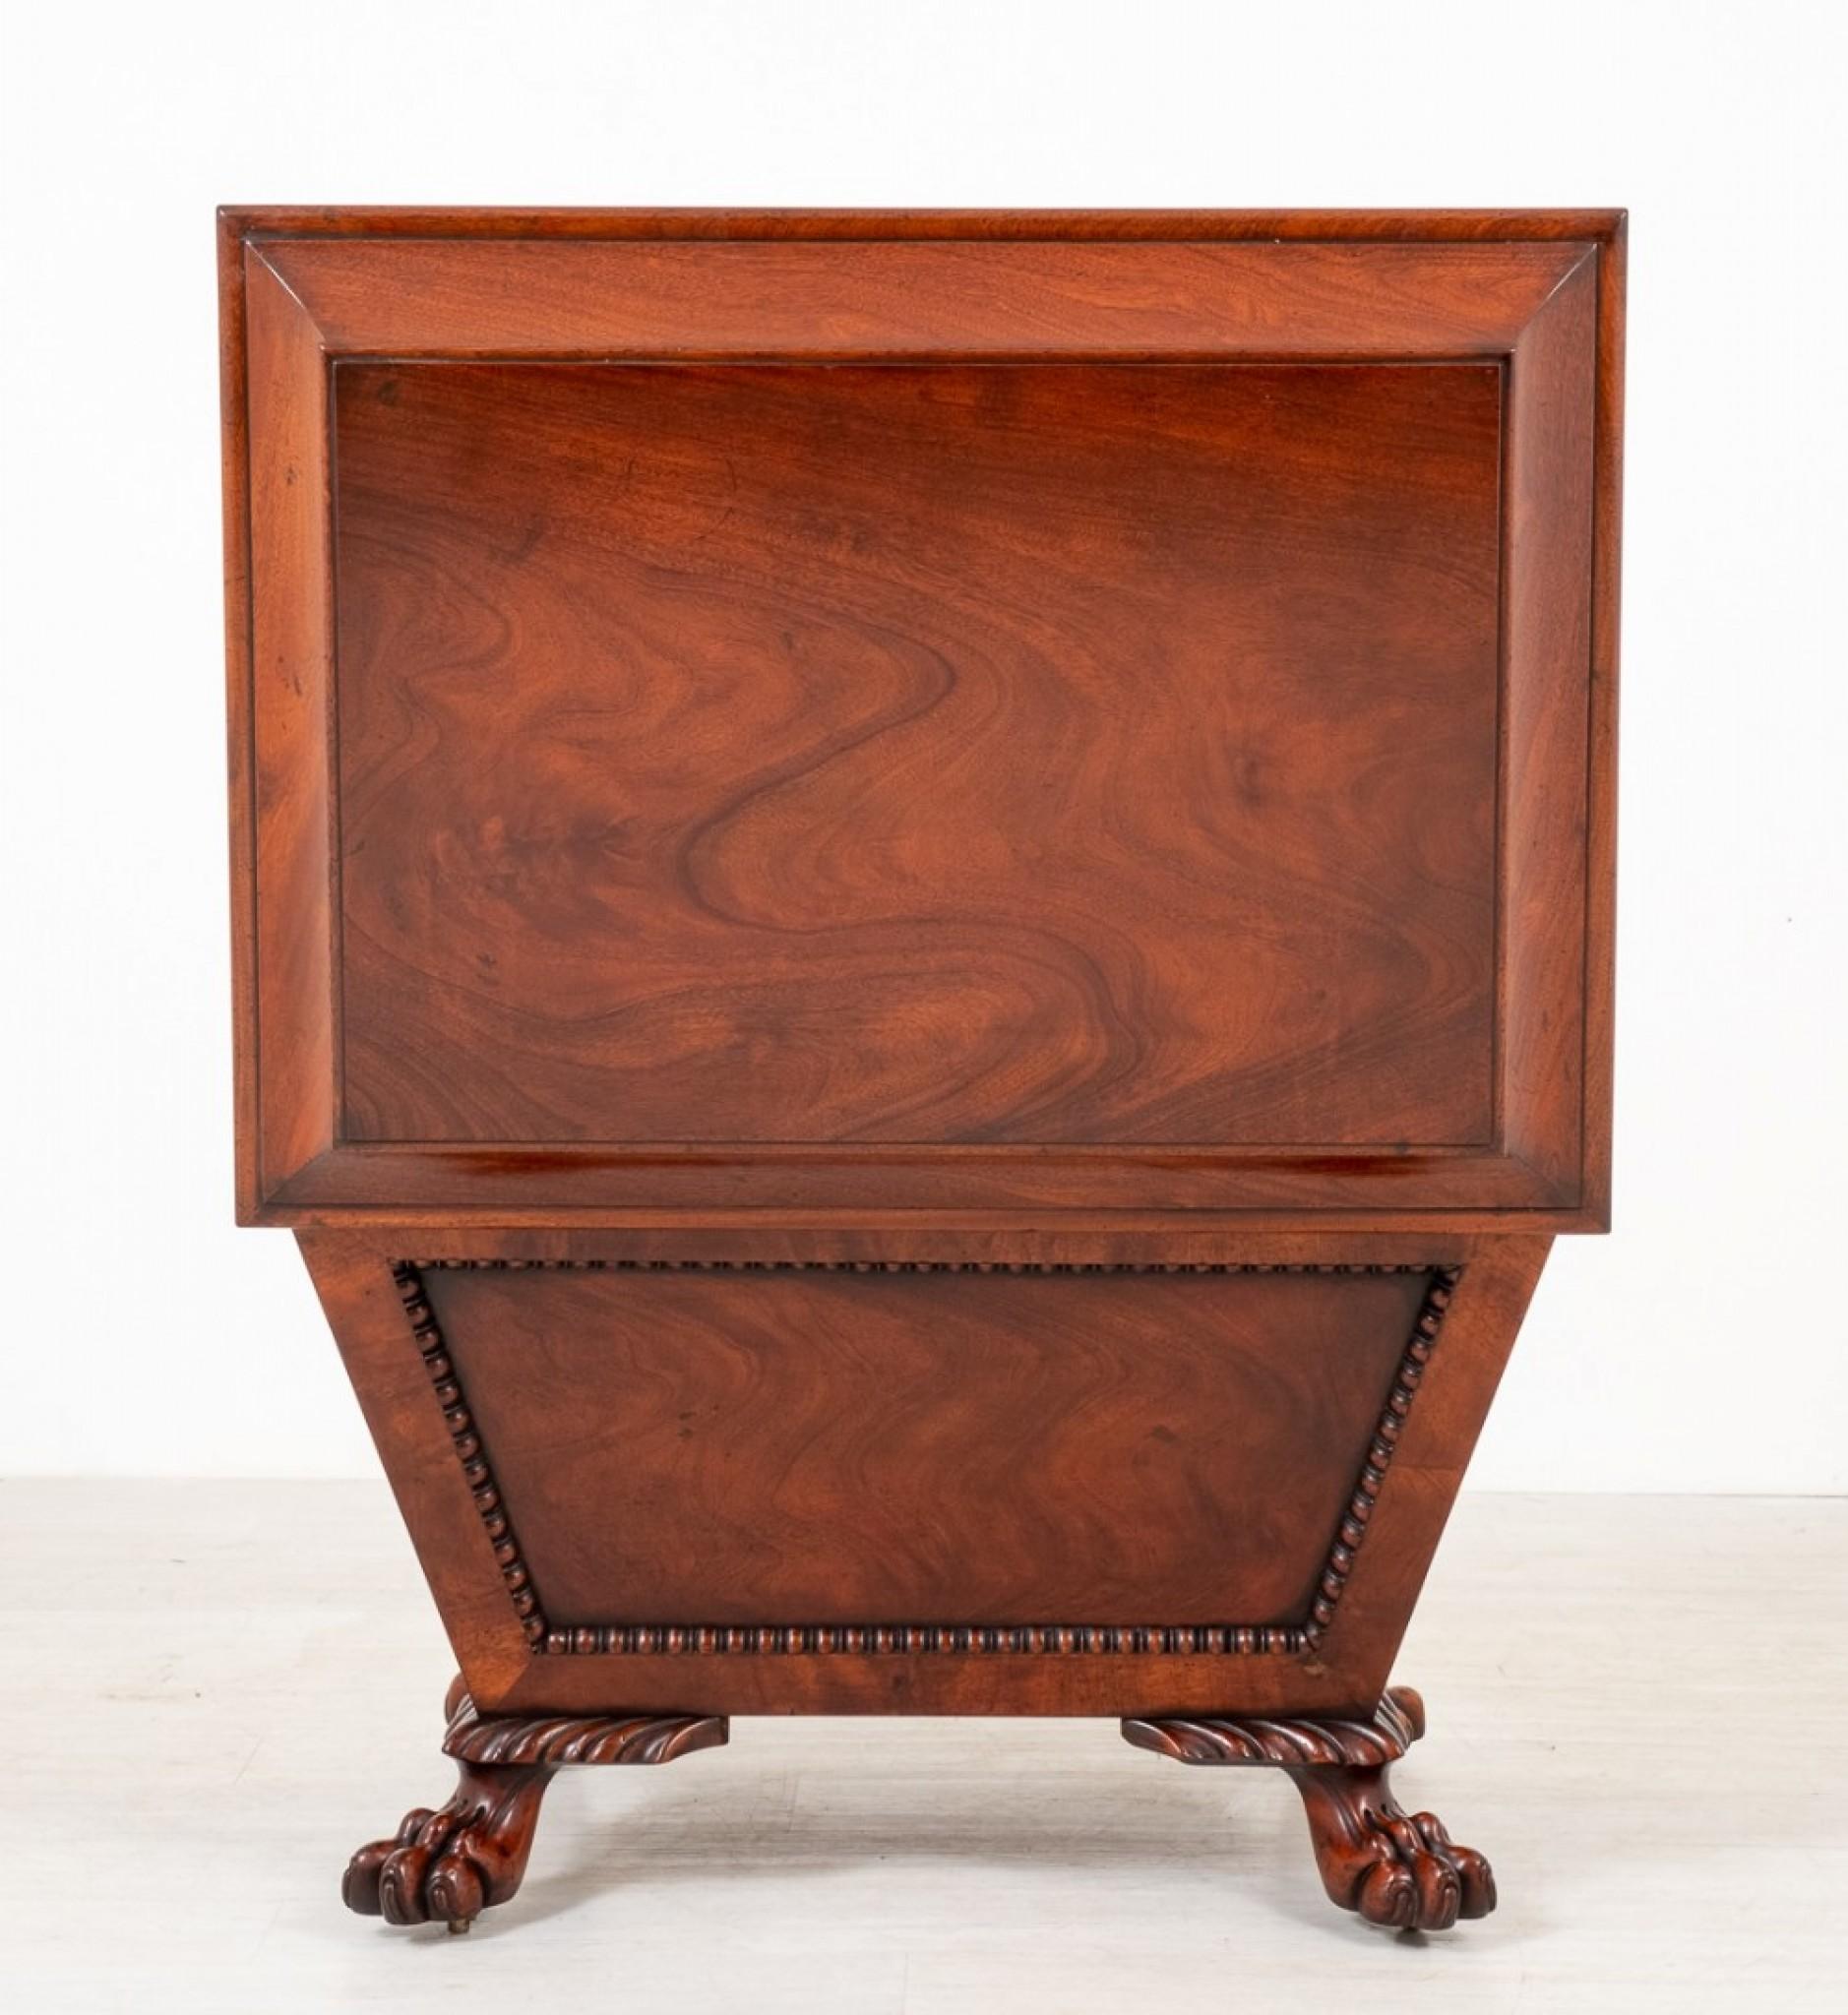 Regency style mahogany wine cooler.
This wine cooler is of sarcophagus form.
circa 1930
Raised upon boldly carved lions paw feet.
The wine cooler features highly figured mahogany panels with half turned mouldings and a shaped top.
Presented in